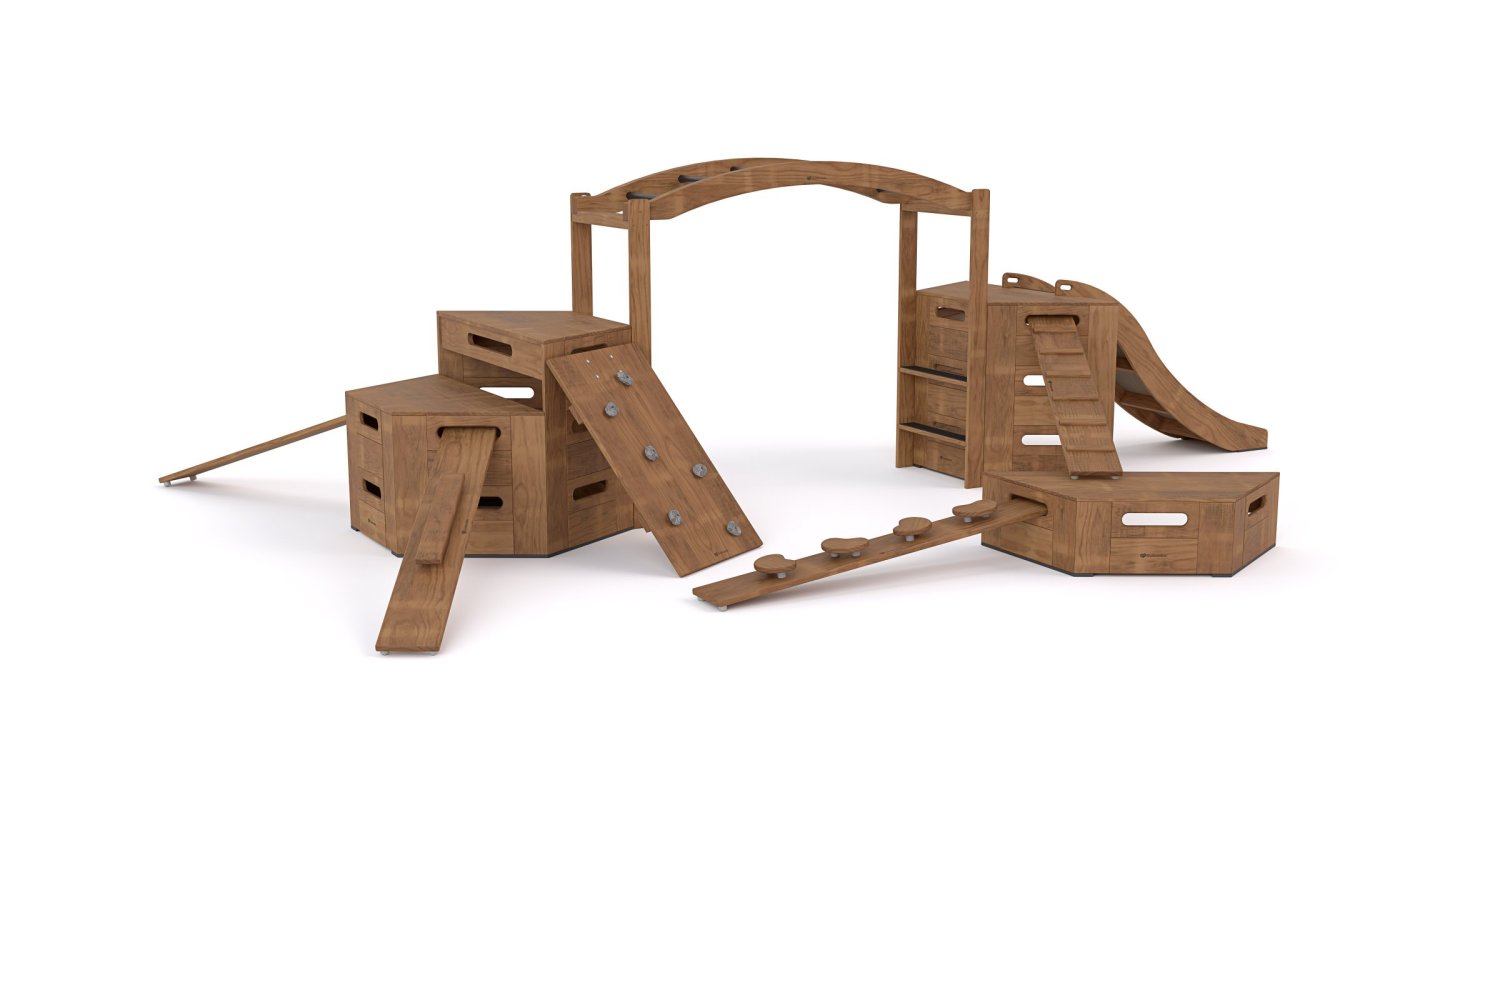 Outdoor Climber movable play boxes and monkey bars with slide